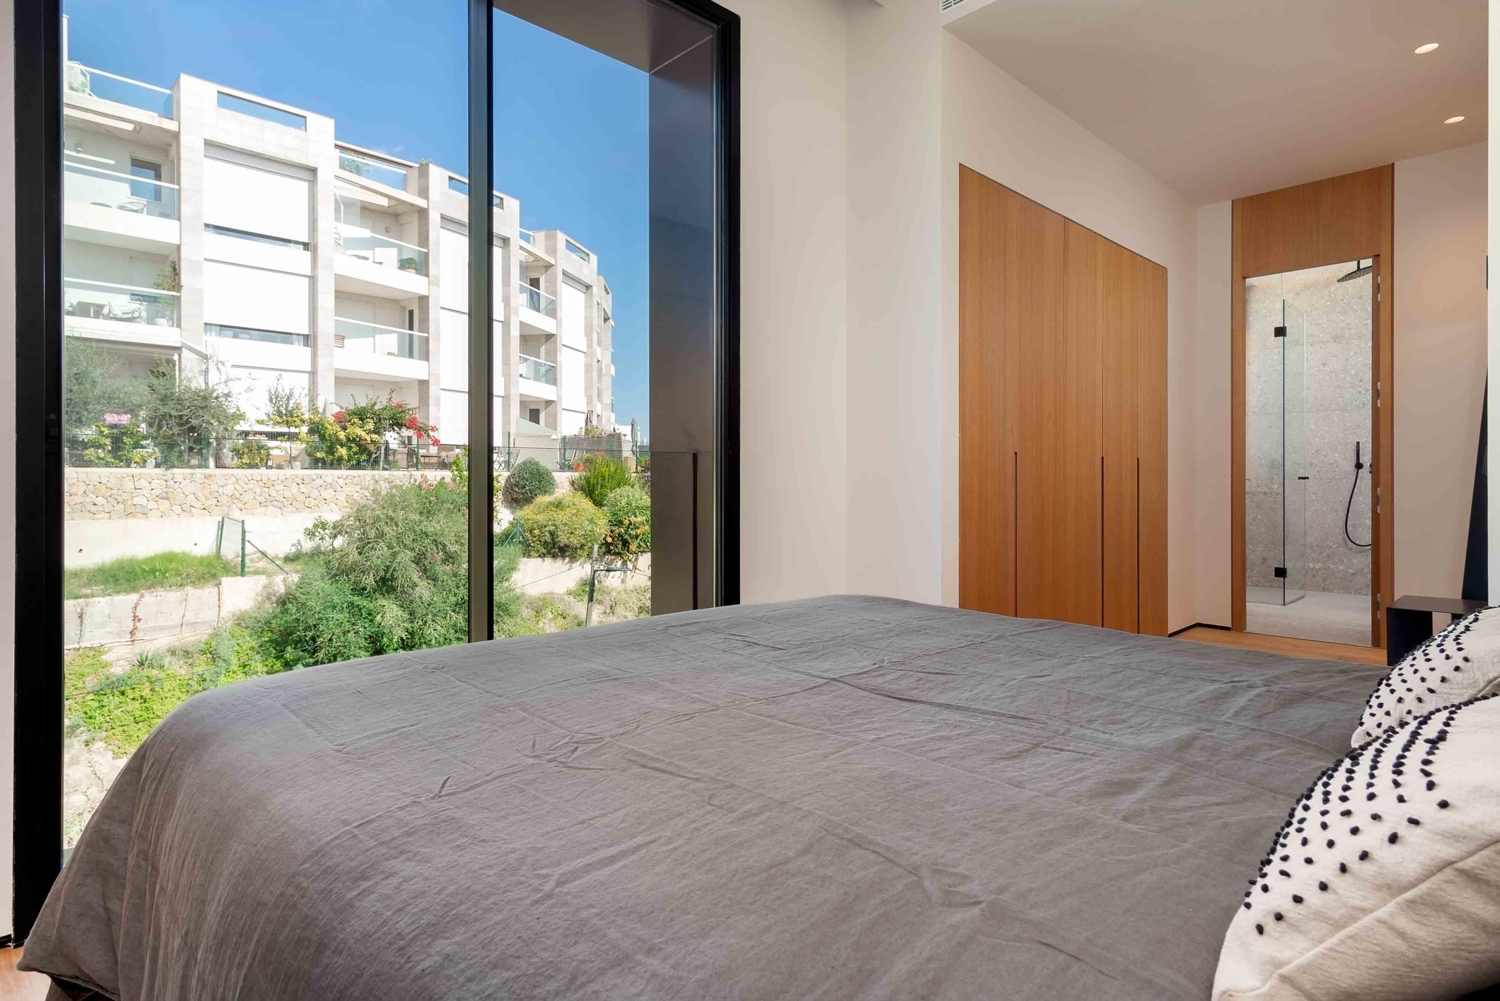 NEW DESIGN PENTHOUSE IN CALA MAYOR WITH PRIVATE TERRACE AND SWIMMING POOL